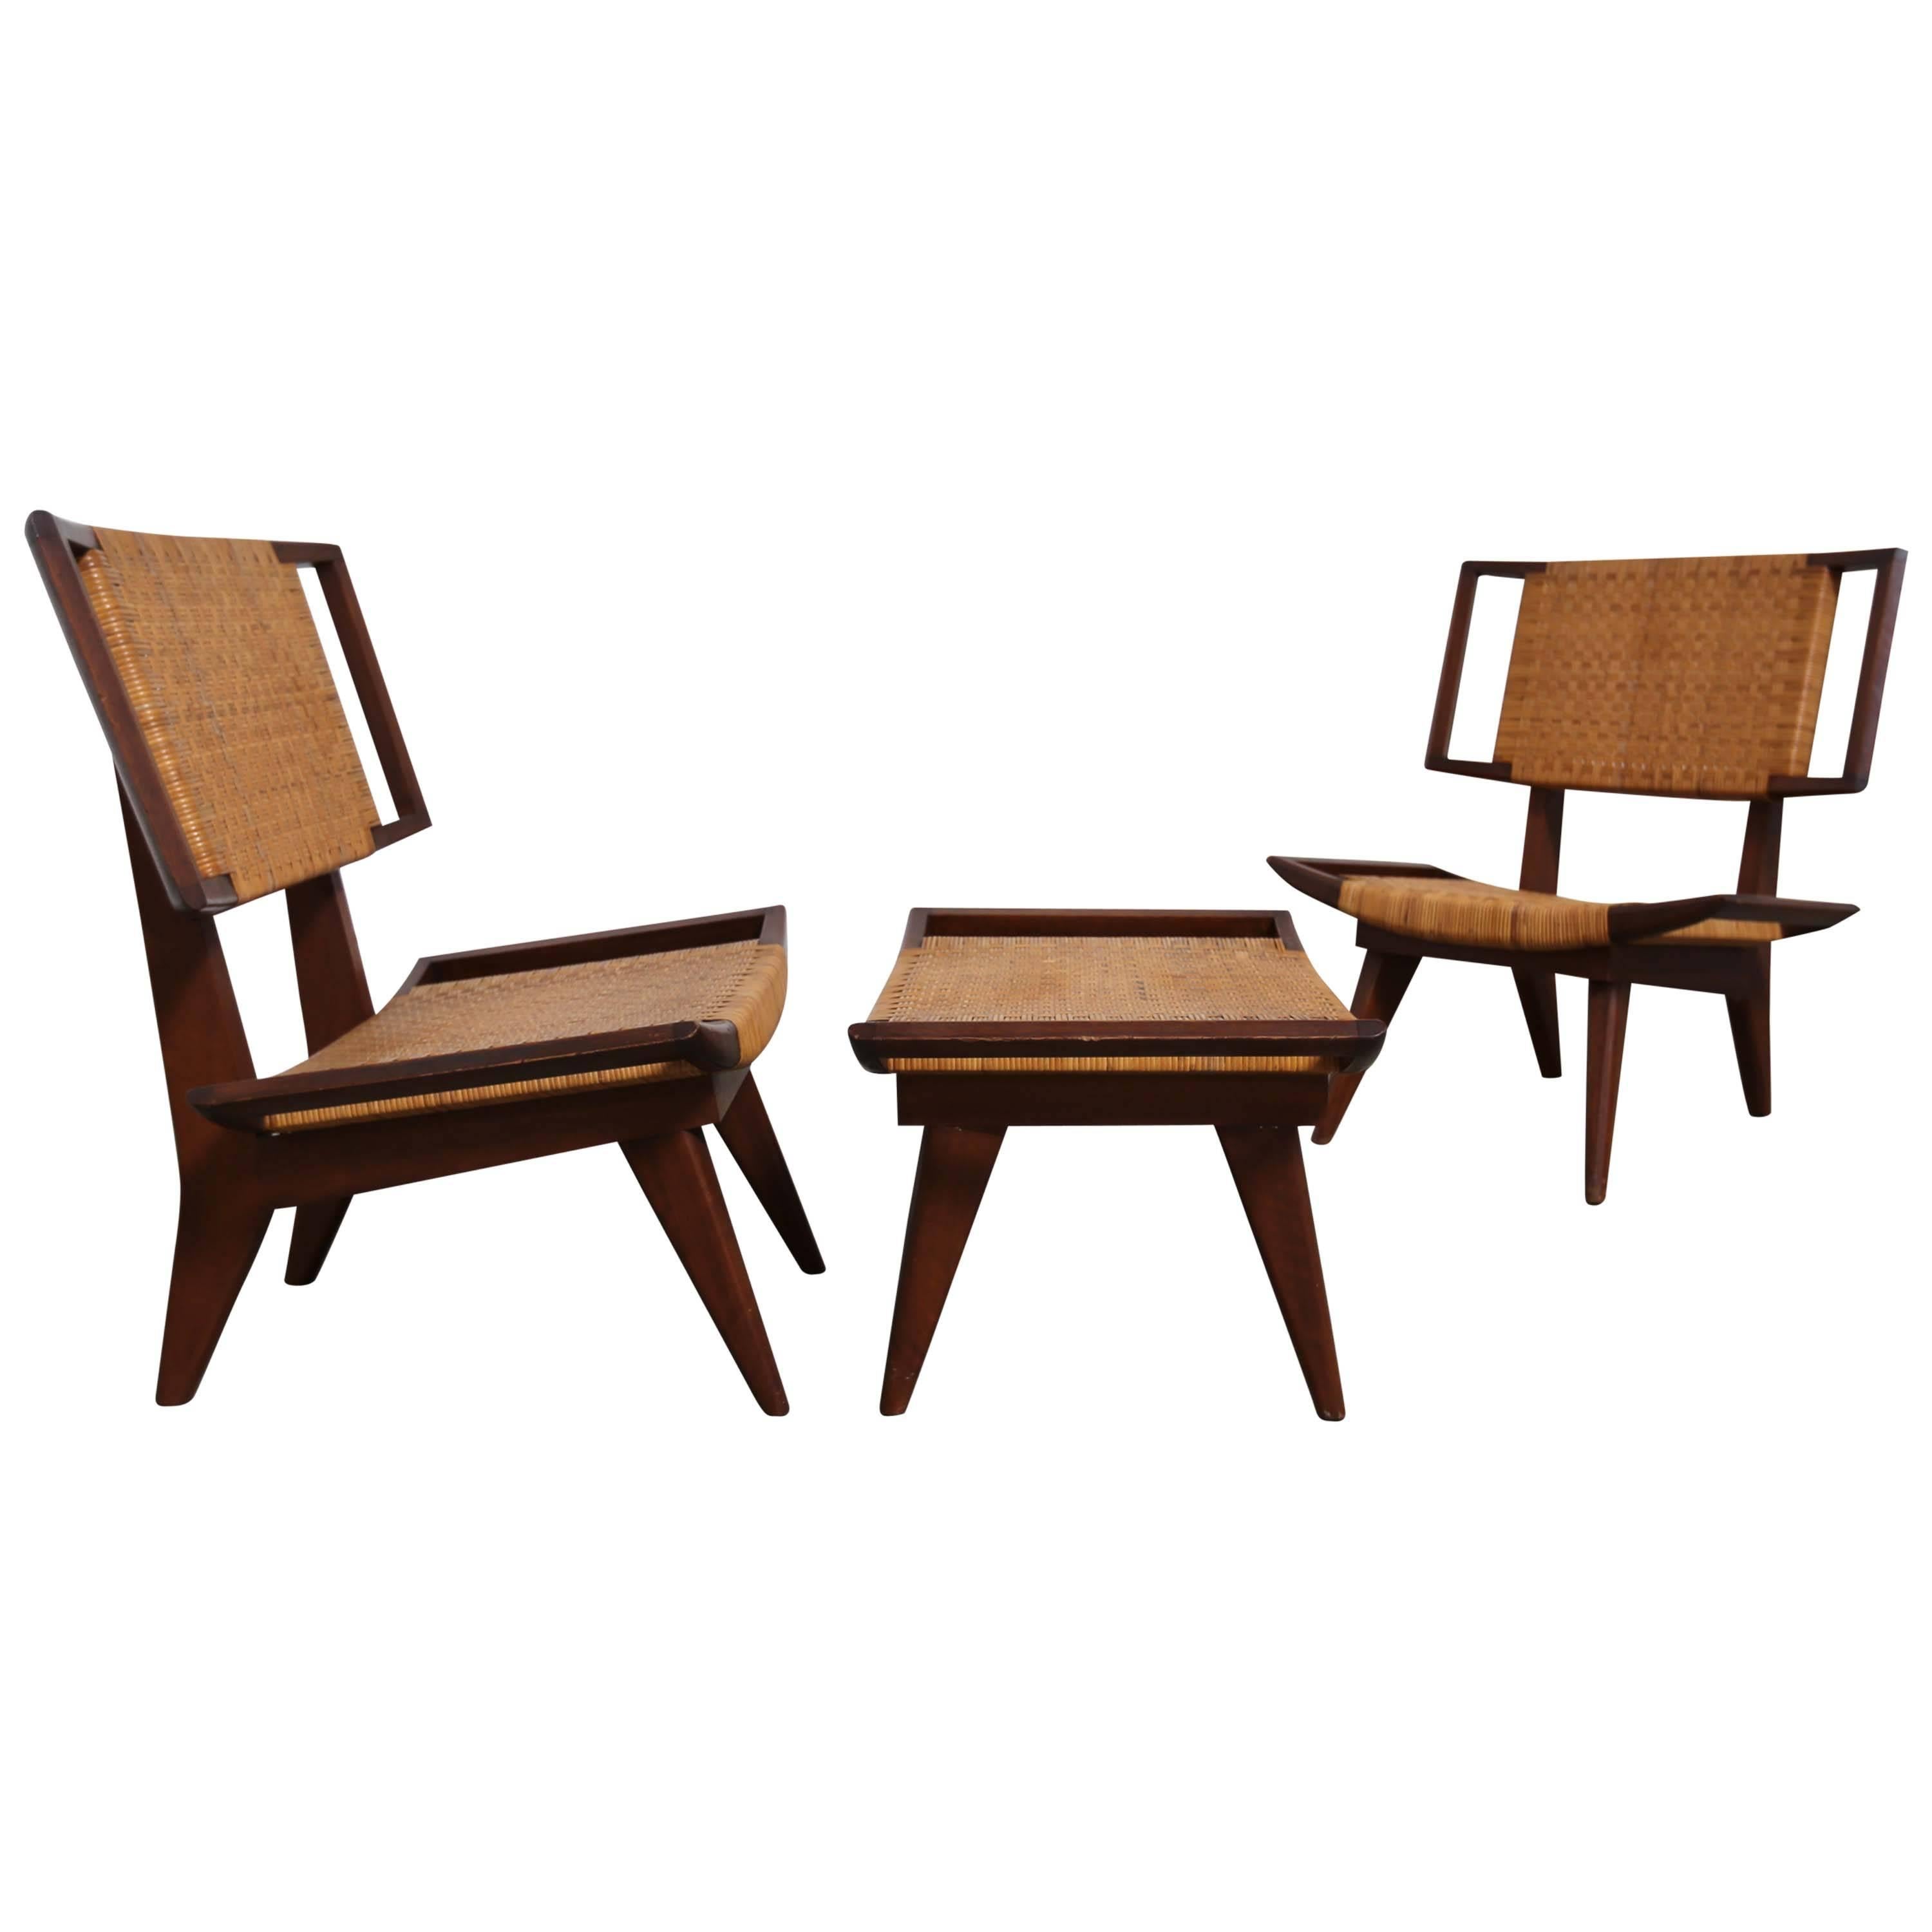 Rare Pair of Lounge Chairs by Paul Laszlo